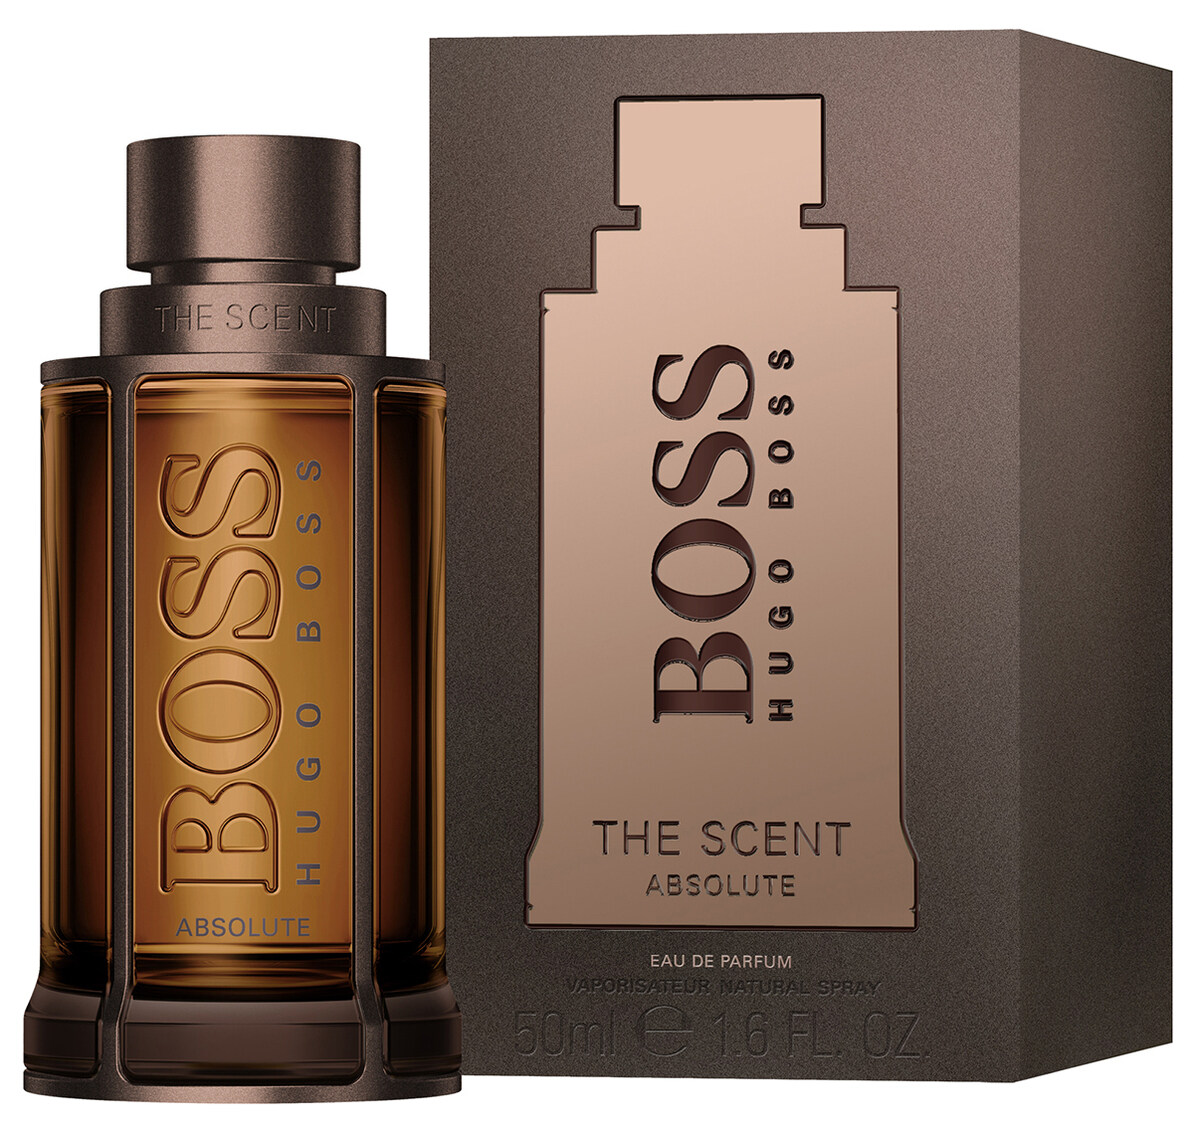 the scent review